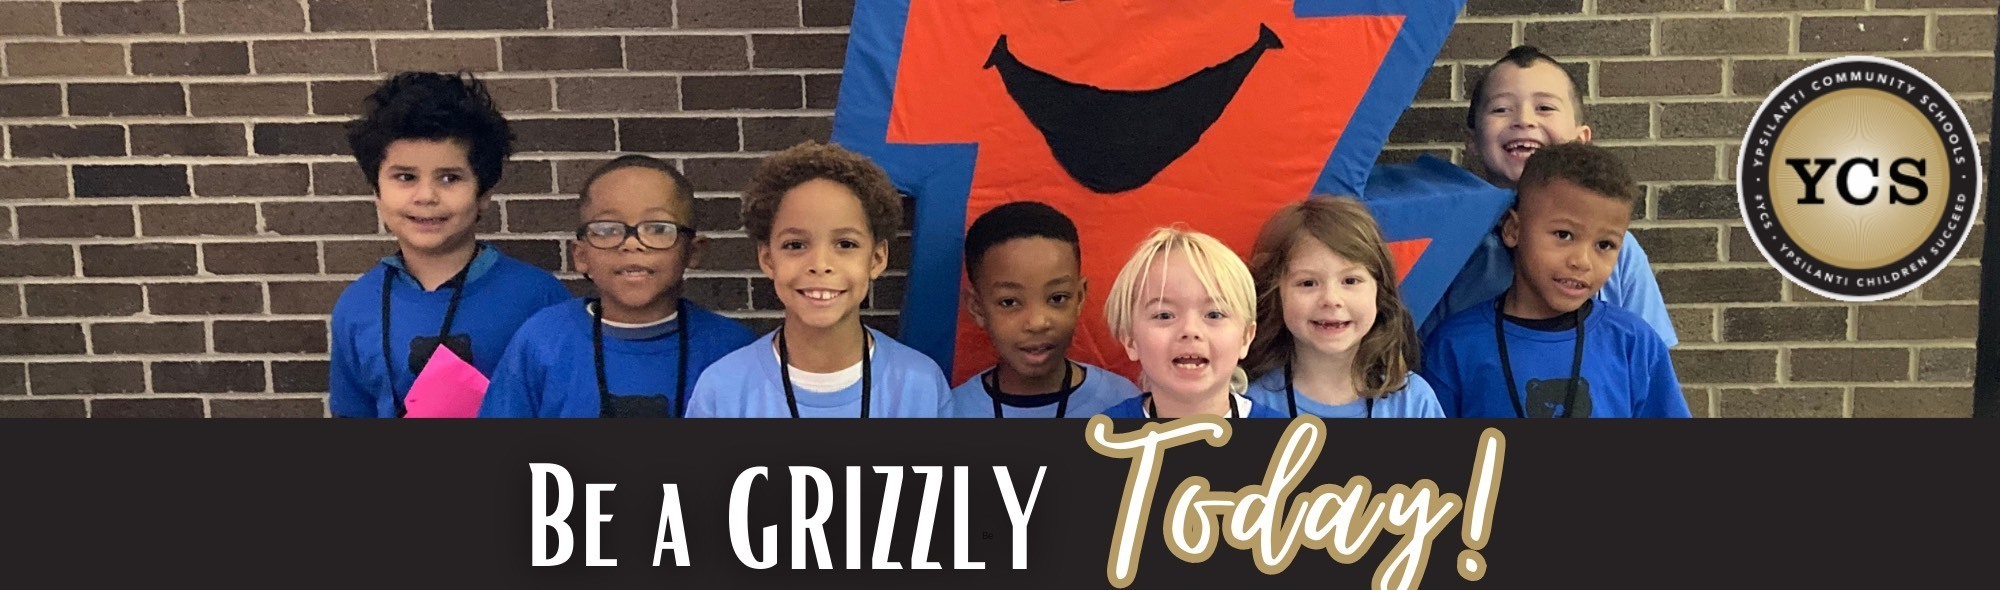 Be A Grizzly Today!